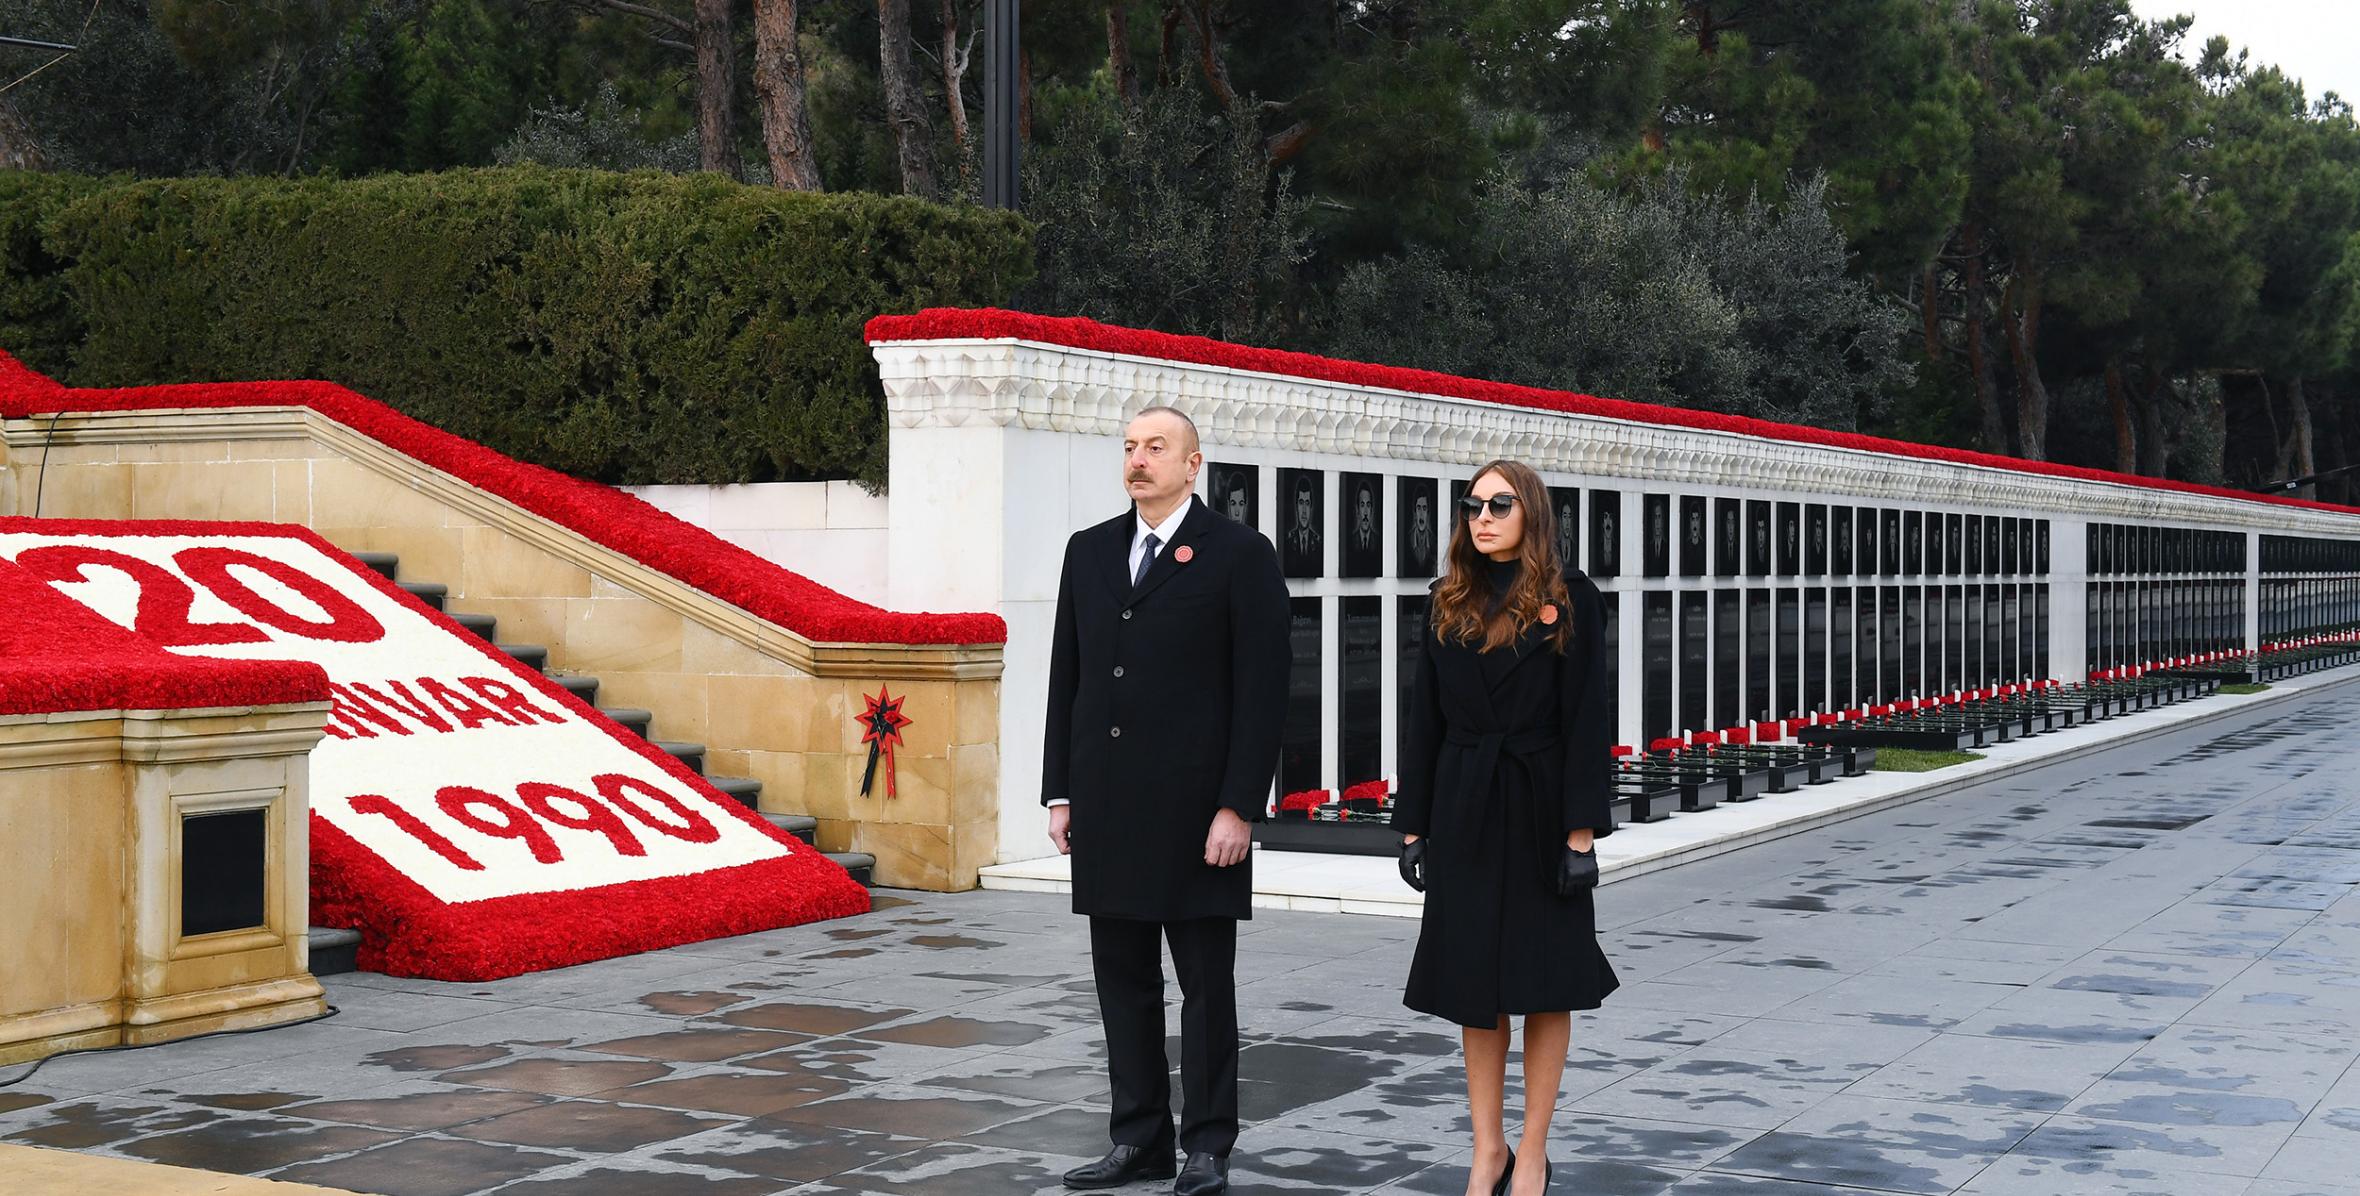 Ilham Aliyev and First Lady Mehriban Aliyeva visited Alley of Martyrs on the 31st anniversary of the 20 January tragedy